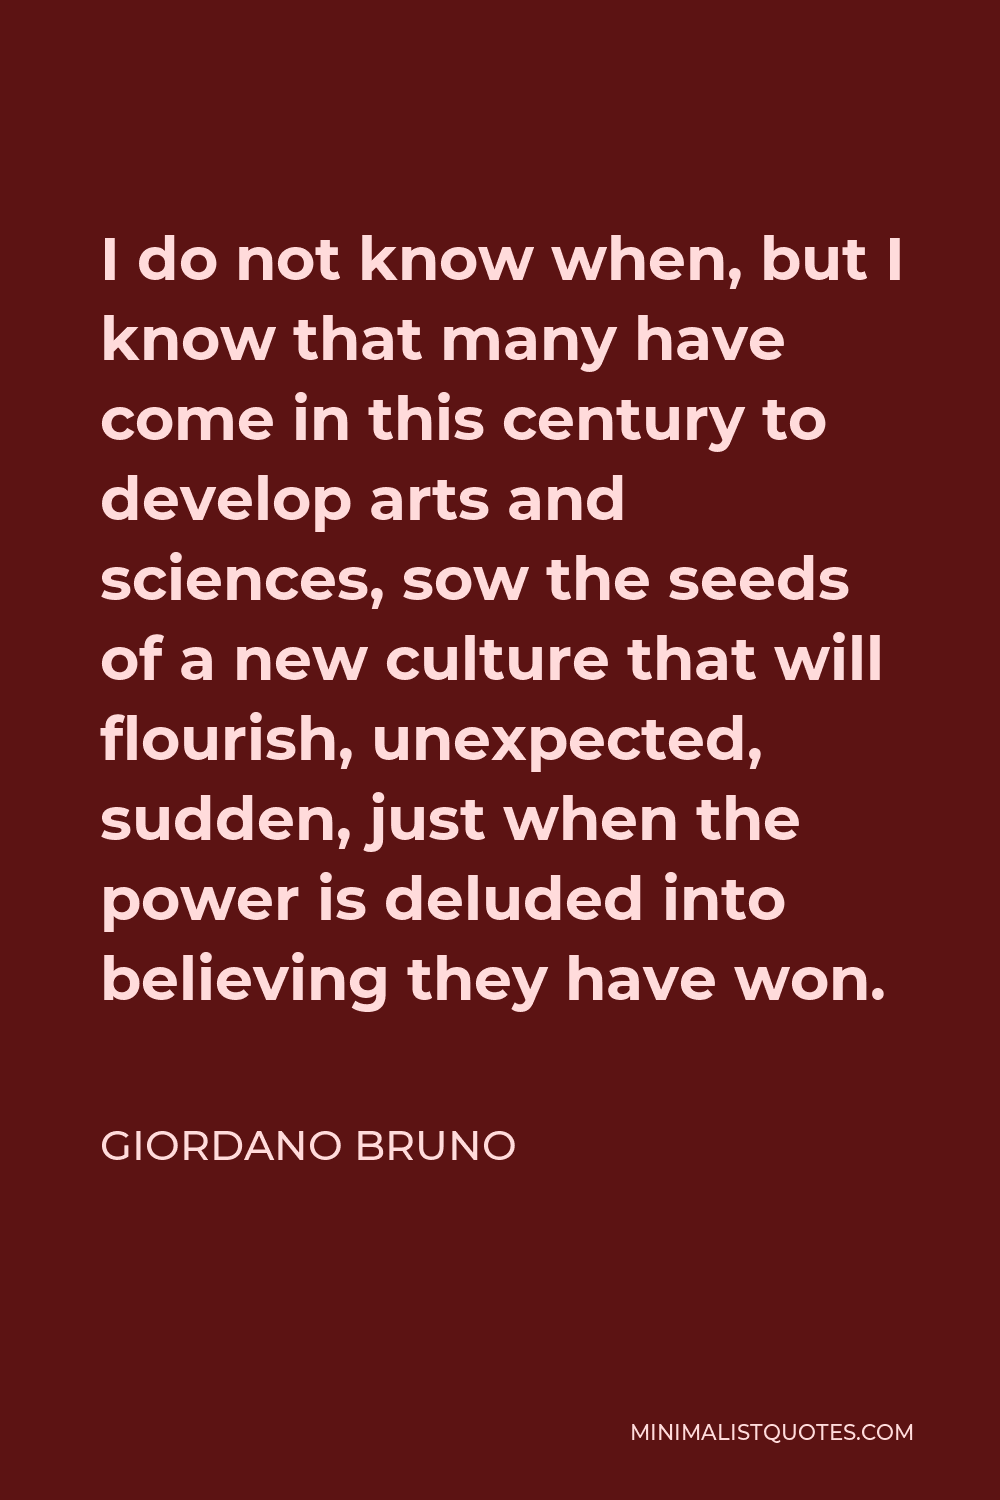 Giordano Bruno Quote - I do not know when, but I know that many have come in this century to develop arts and sciences, sow the seeds of a new culture that will flourish, unexpected, sudden, just when the power is deluded into believing they have won.